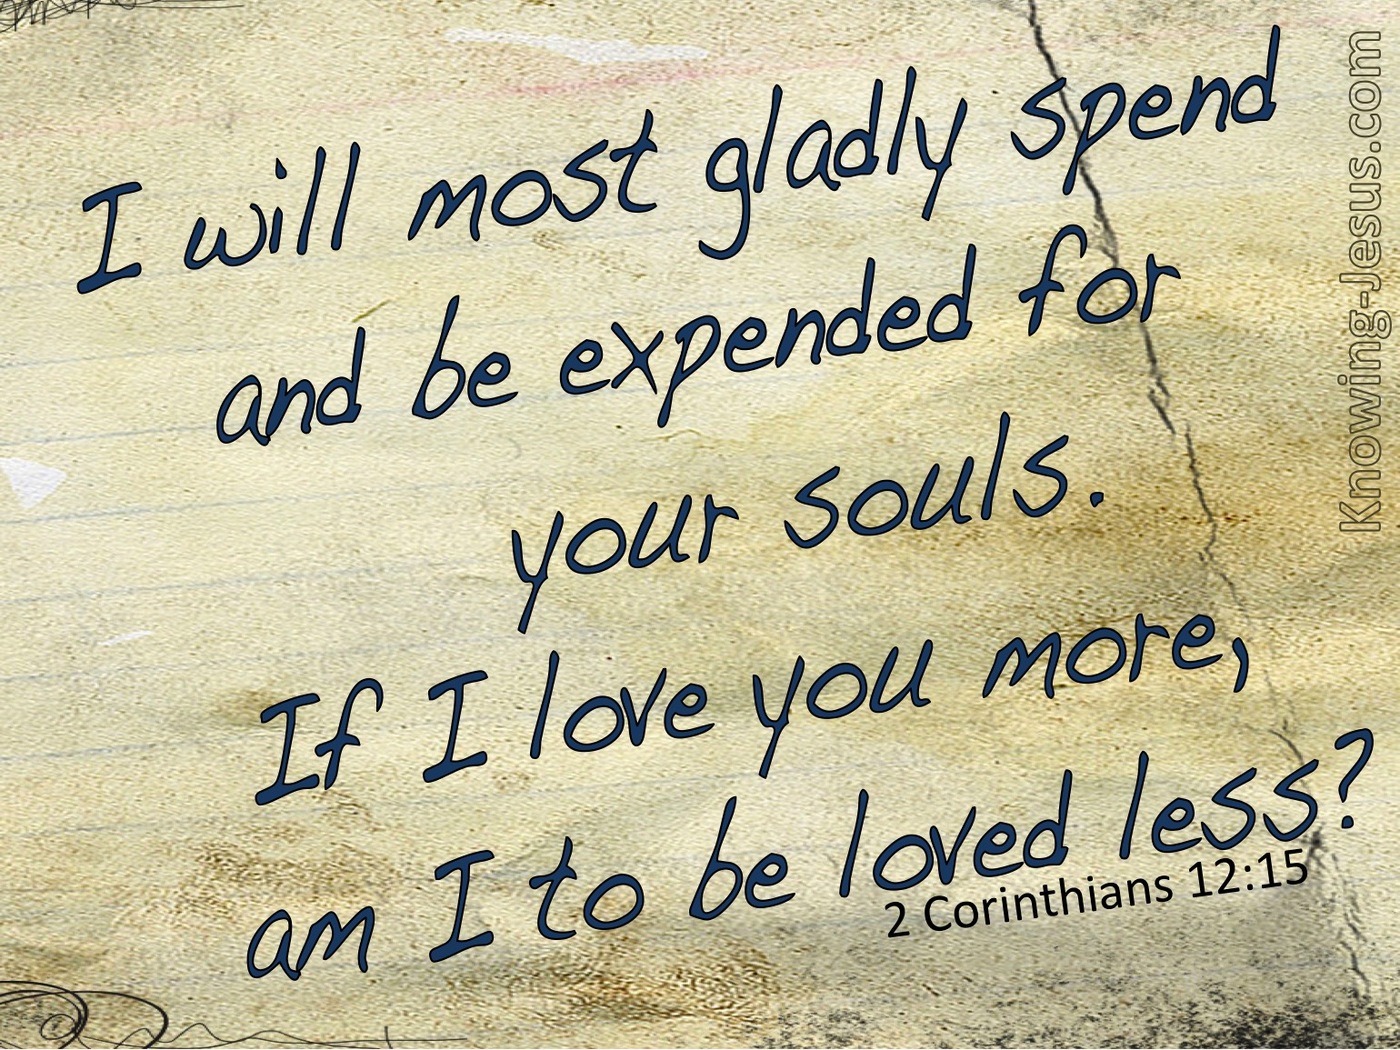 2 Corinthians 12:15 Spent And Expended For You (beige)